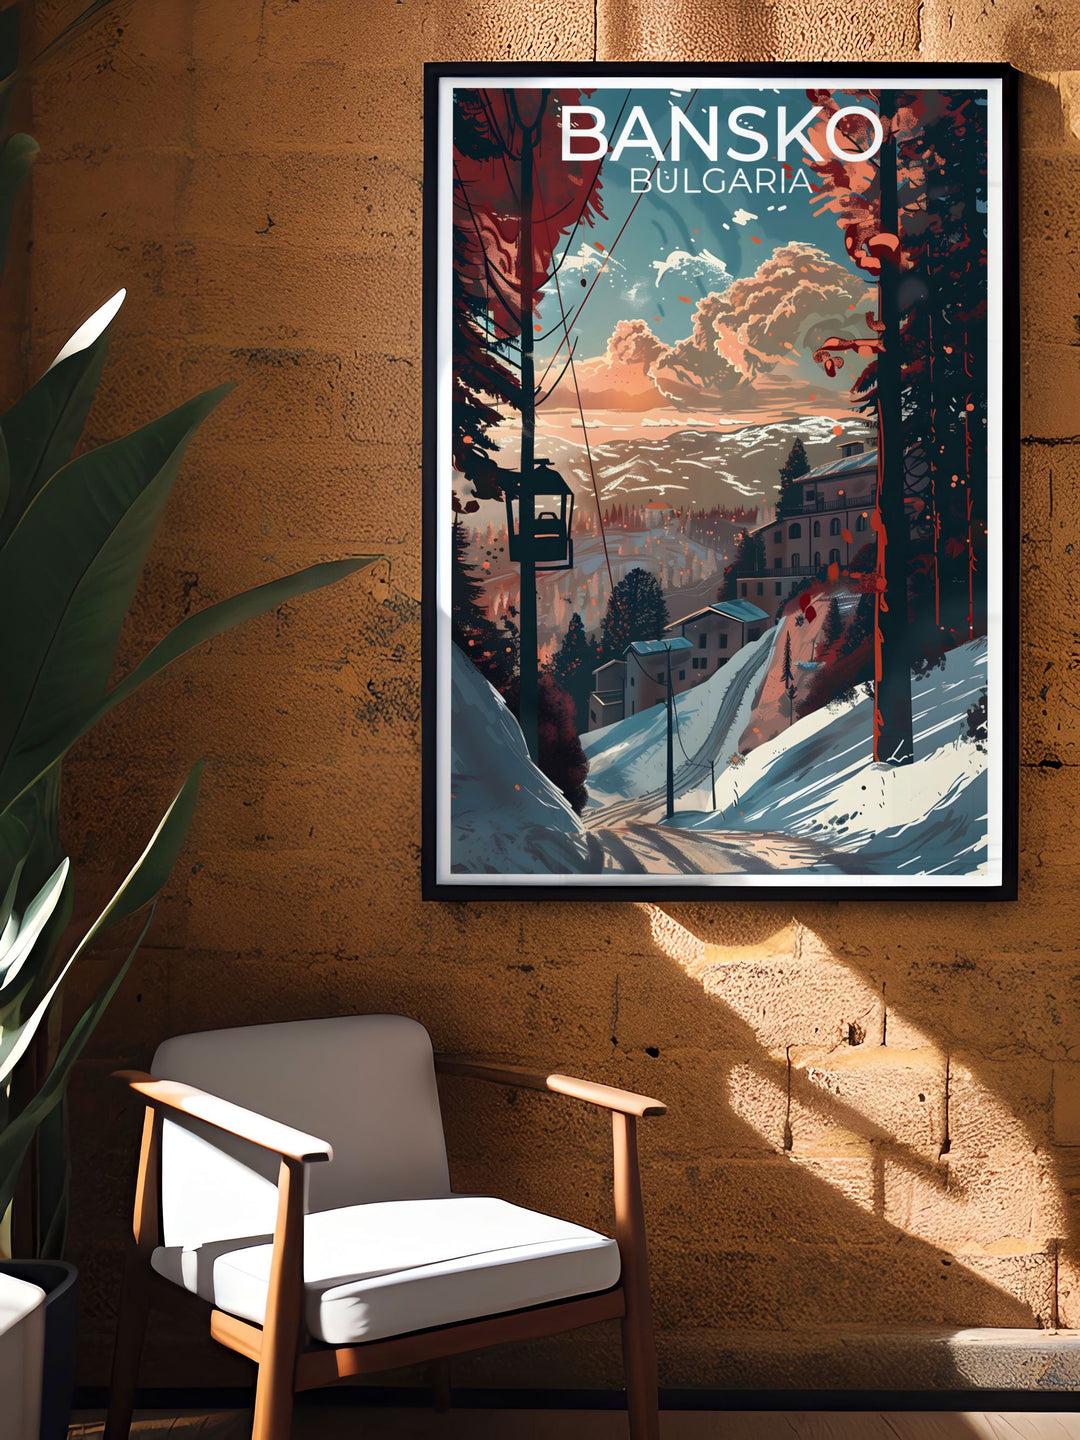 Featuring the iconic Holy Trinity Church and traditional houses of Bansko Old Town, this travel poster captures the rich history and architectural beauty of Bulgaria, ideal for travel enthusiasts.